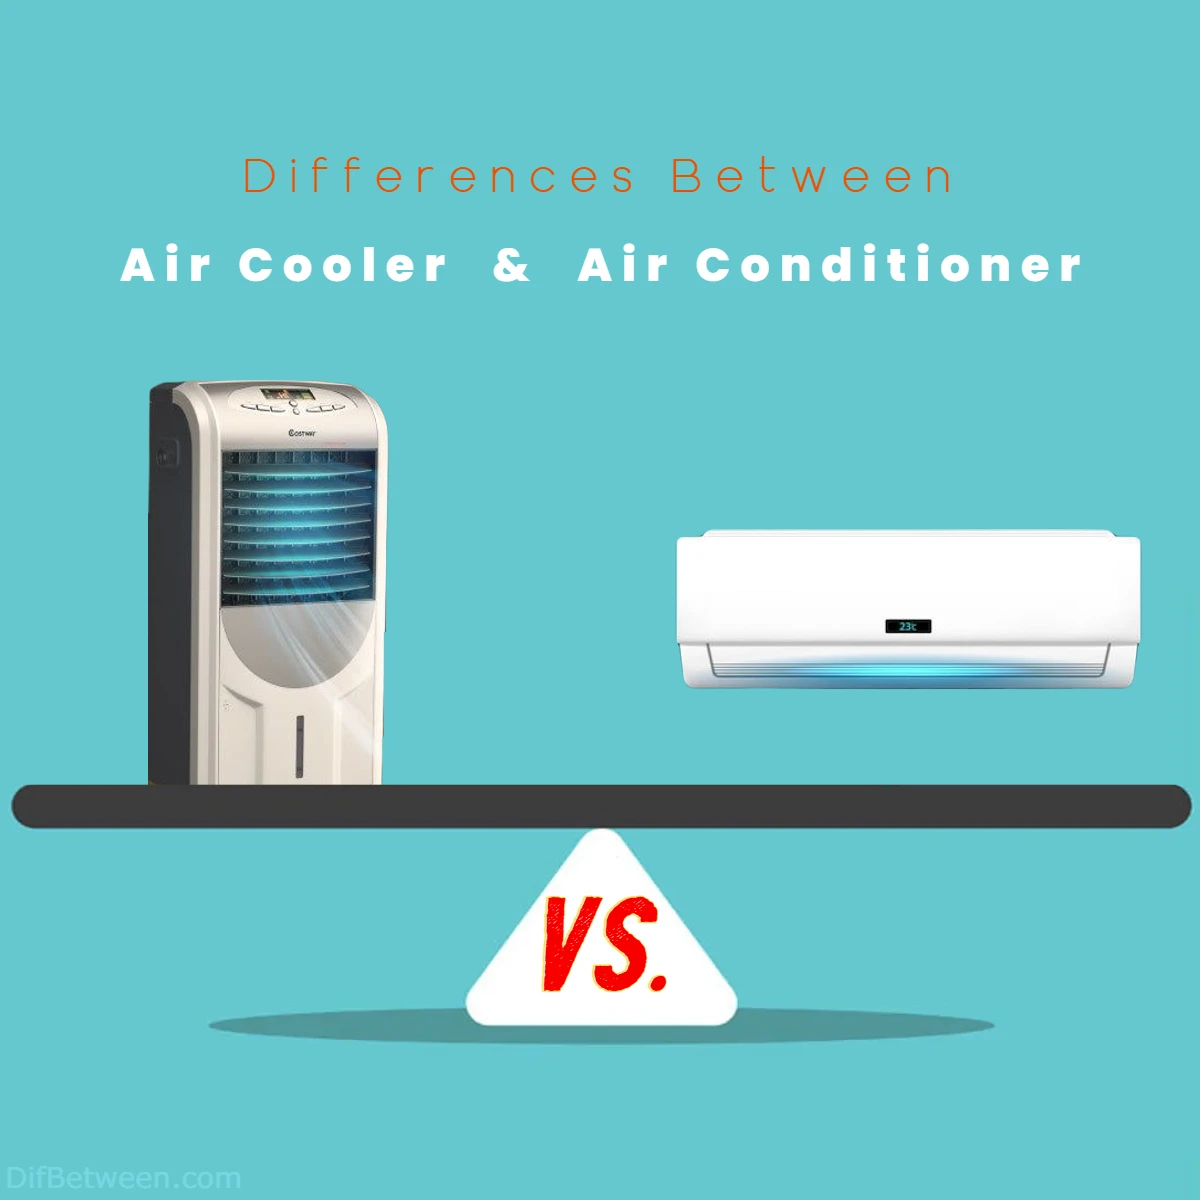 Differences Between Air Cooler vs Air Conditioner